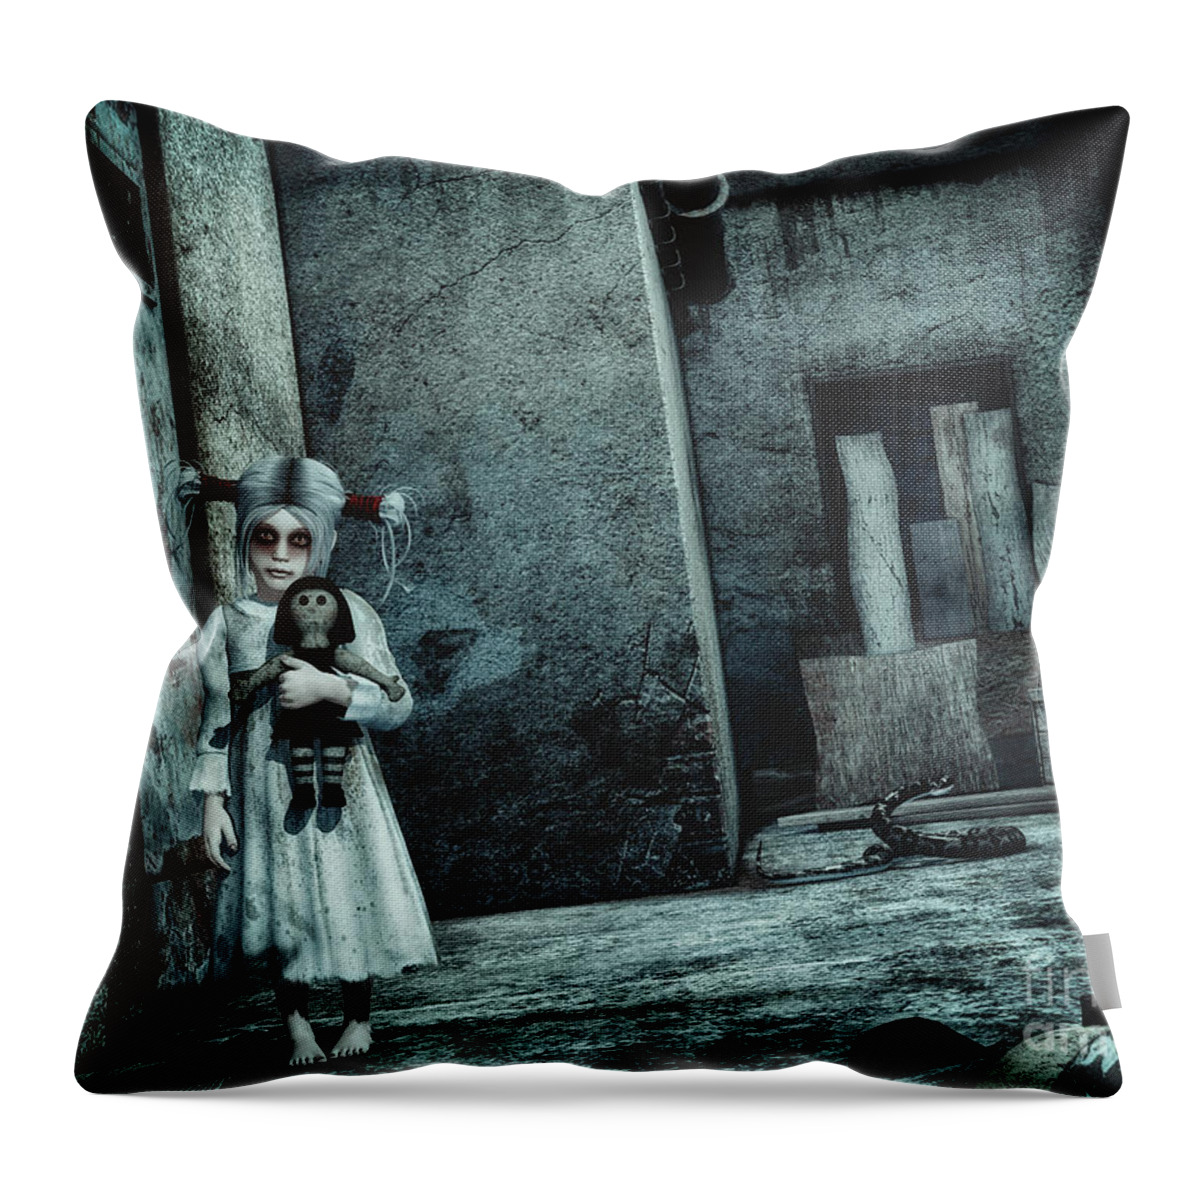 3d Throw Pillow featuring the digital art Scary Place by Jutta Maria Pusl